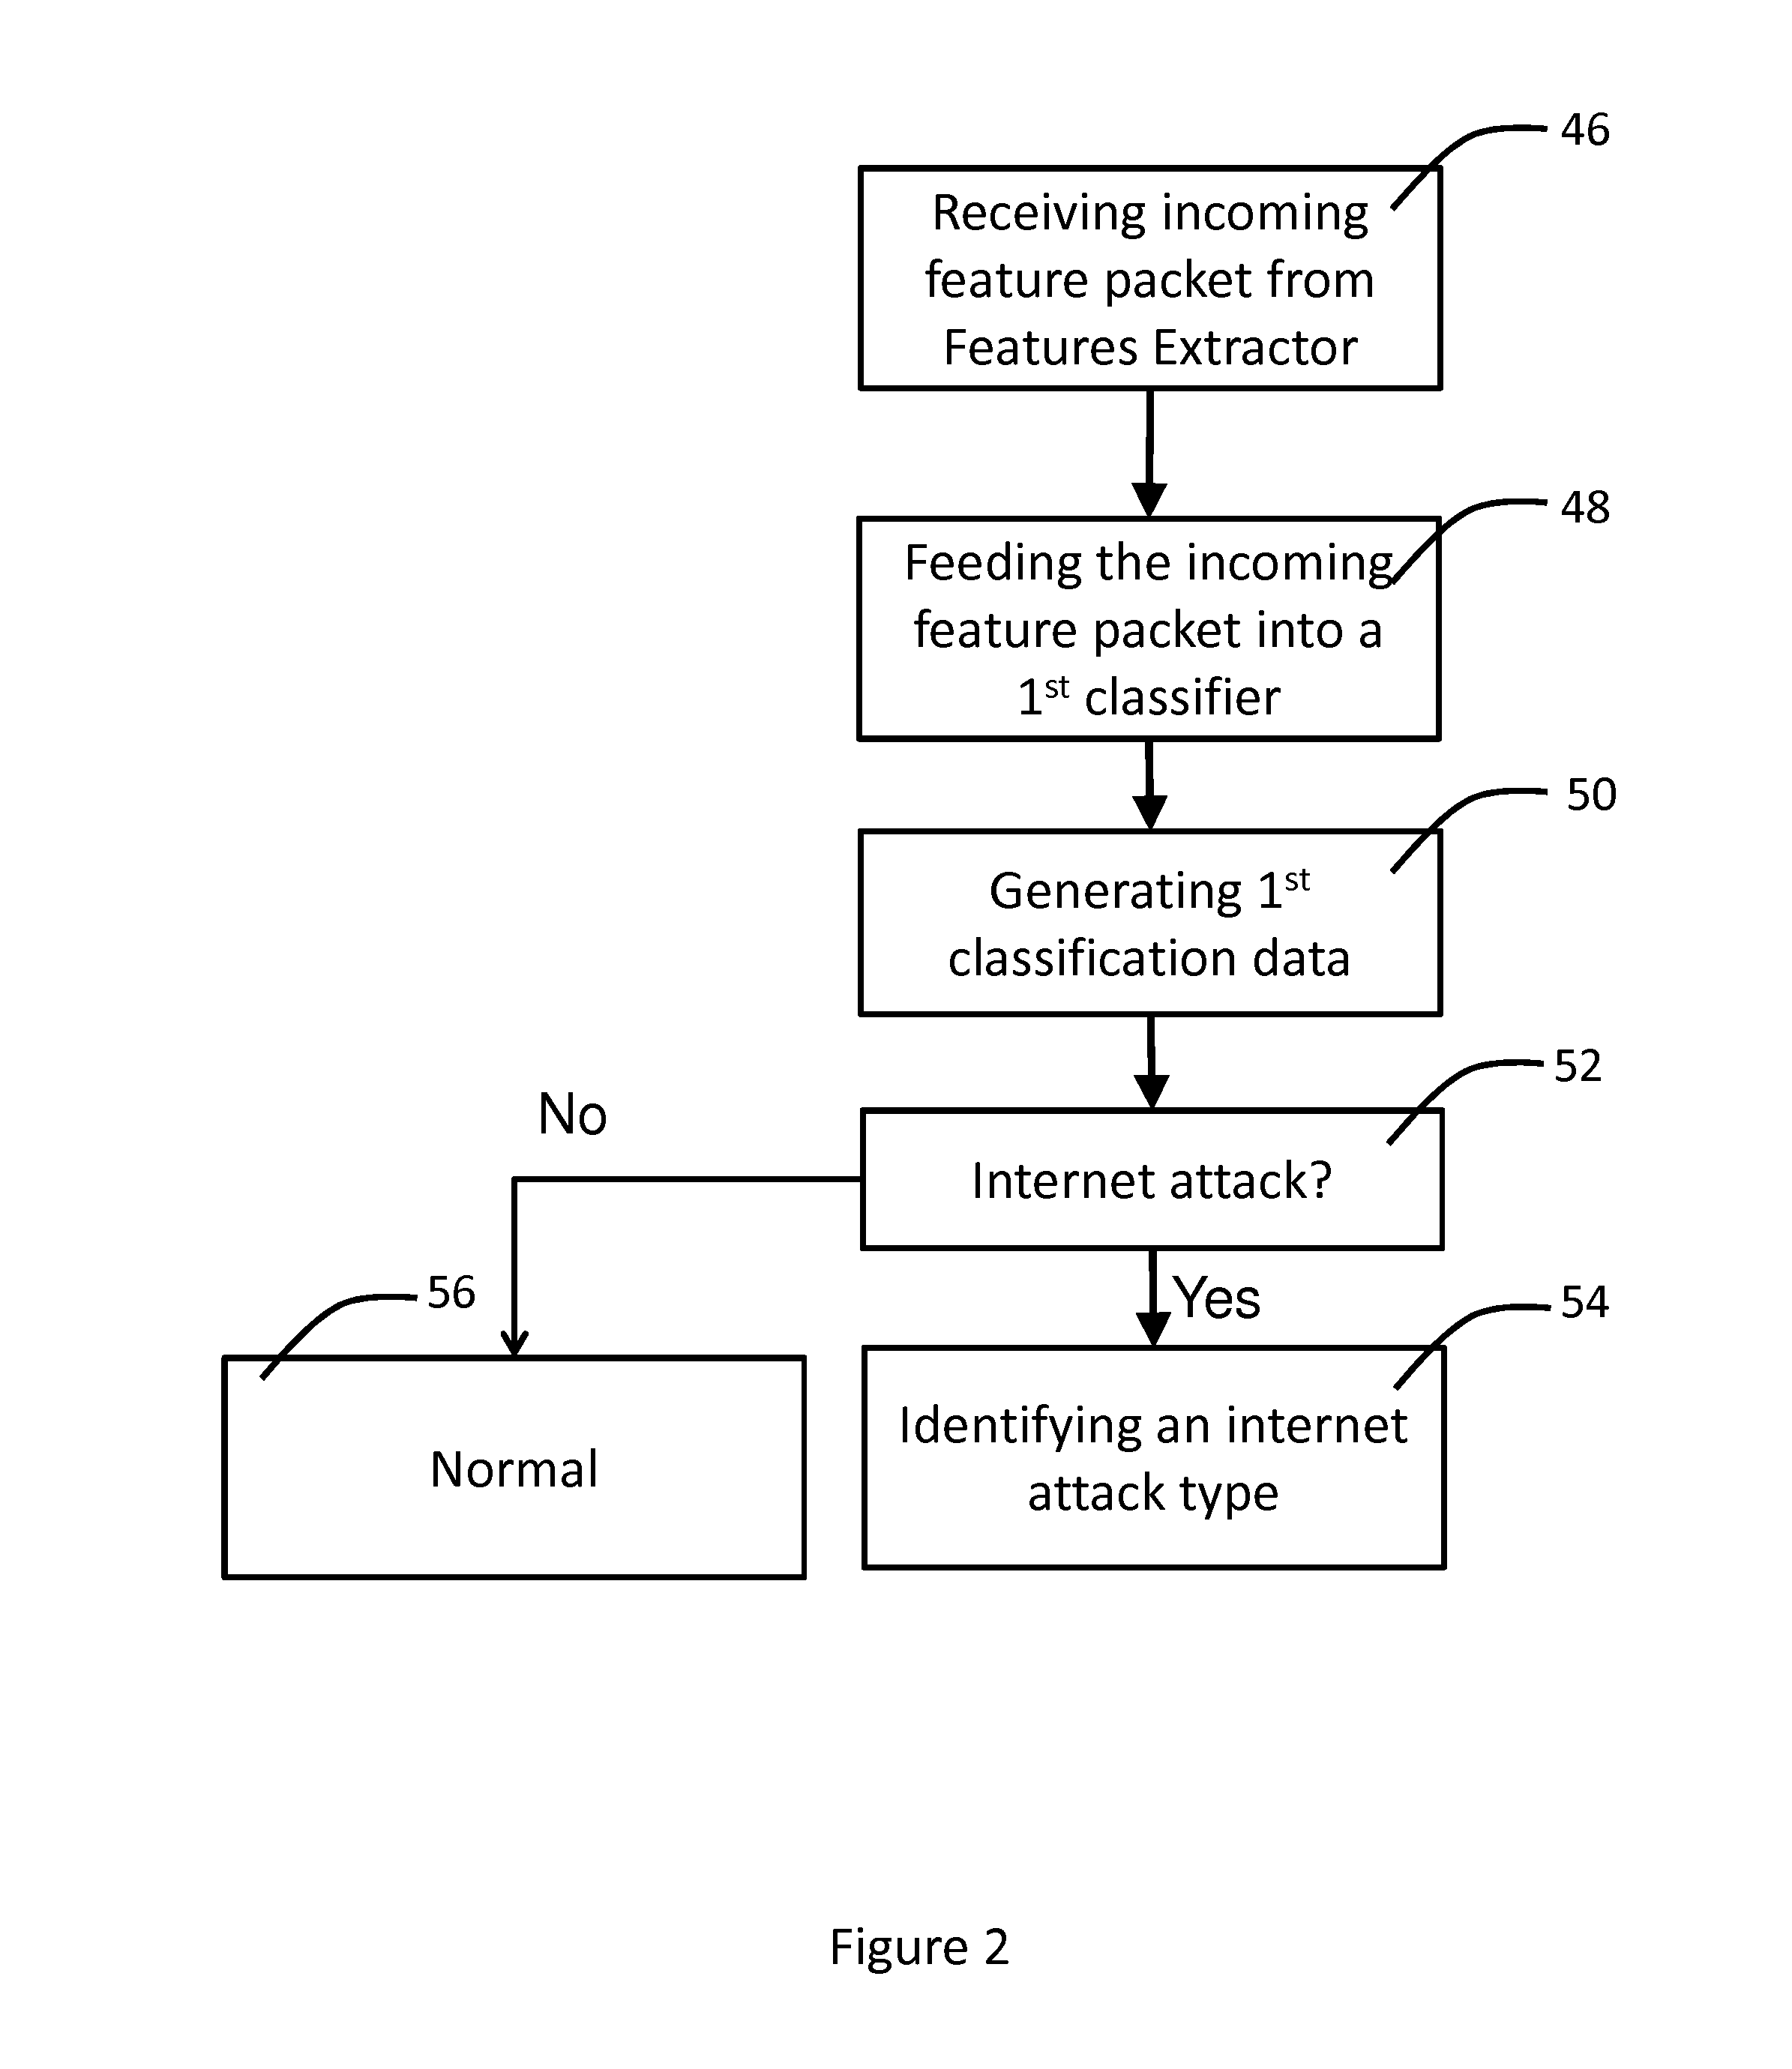 Method for Predicting and Detecting Network Intrusion in a Computer Network